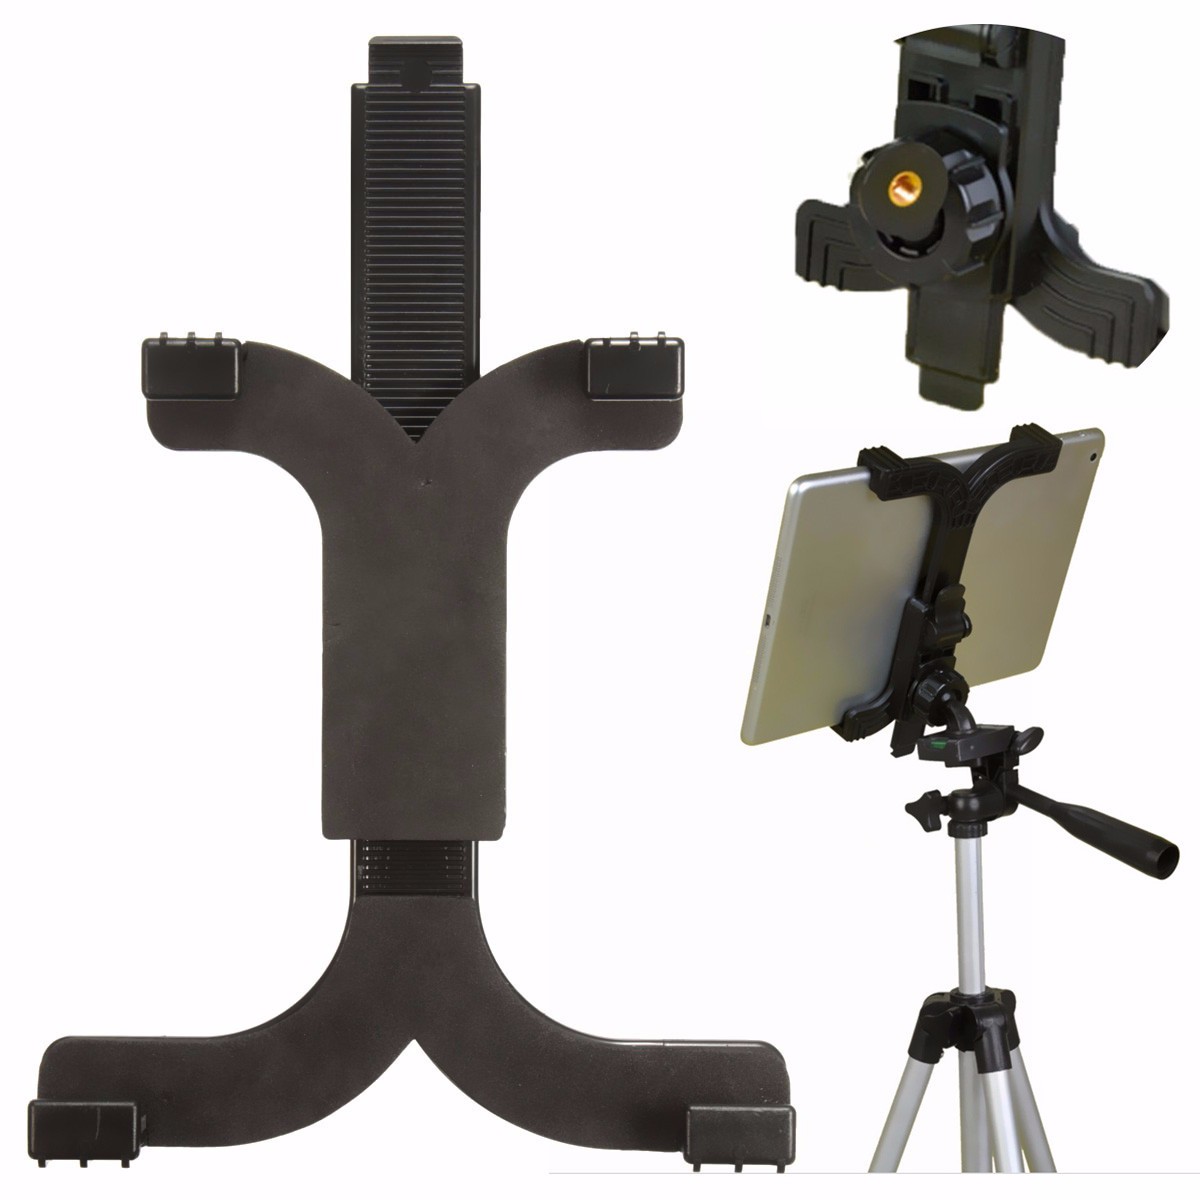 Self-Stick-Tripod-Stand-Holder-Tablet-Bracket-Accessories-For-7-To-11-Inch-for-iPad-for-iPod-Tablet-1047201-1